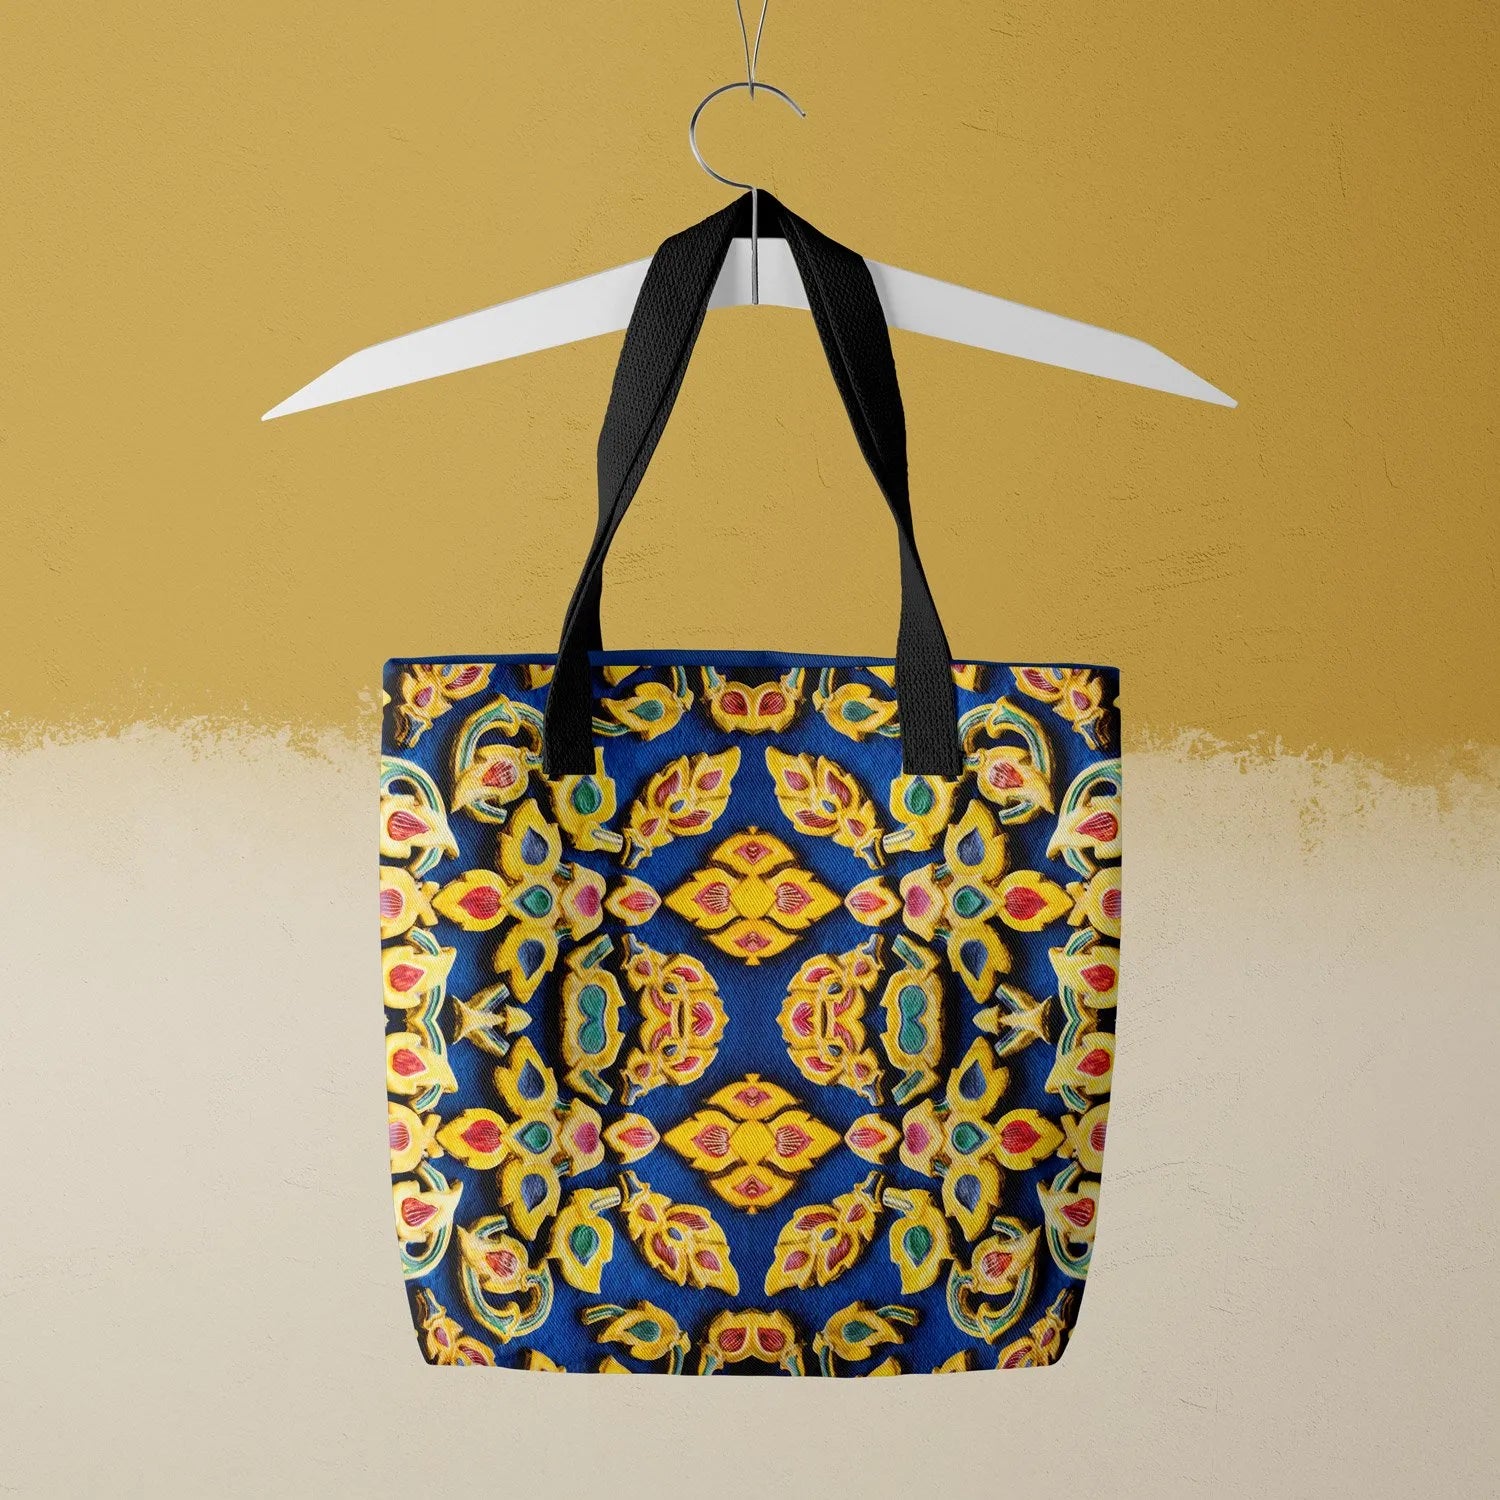 Ayodhya Tote - Heavy Duty Reusable Grocery Bag - Shopping Totes - Aesthetic Art